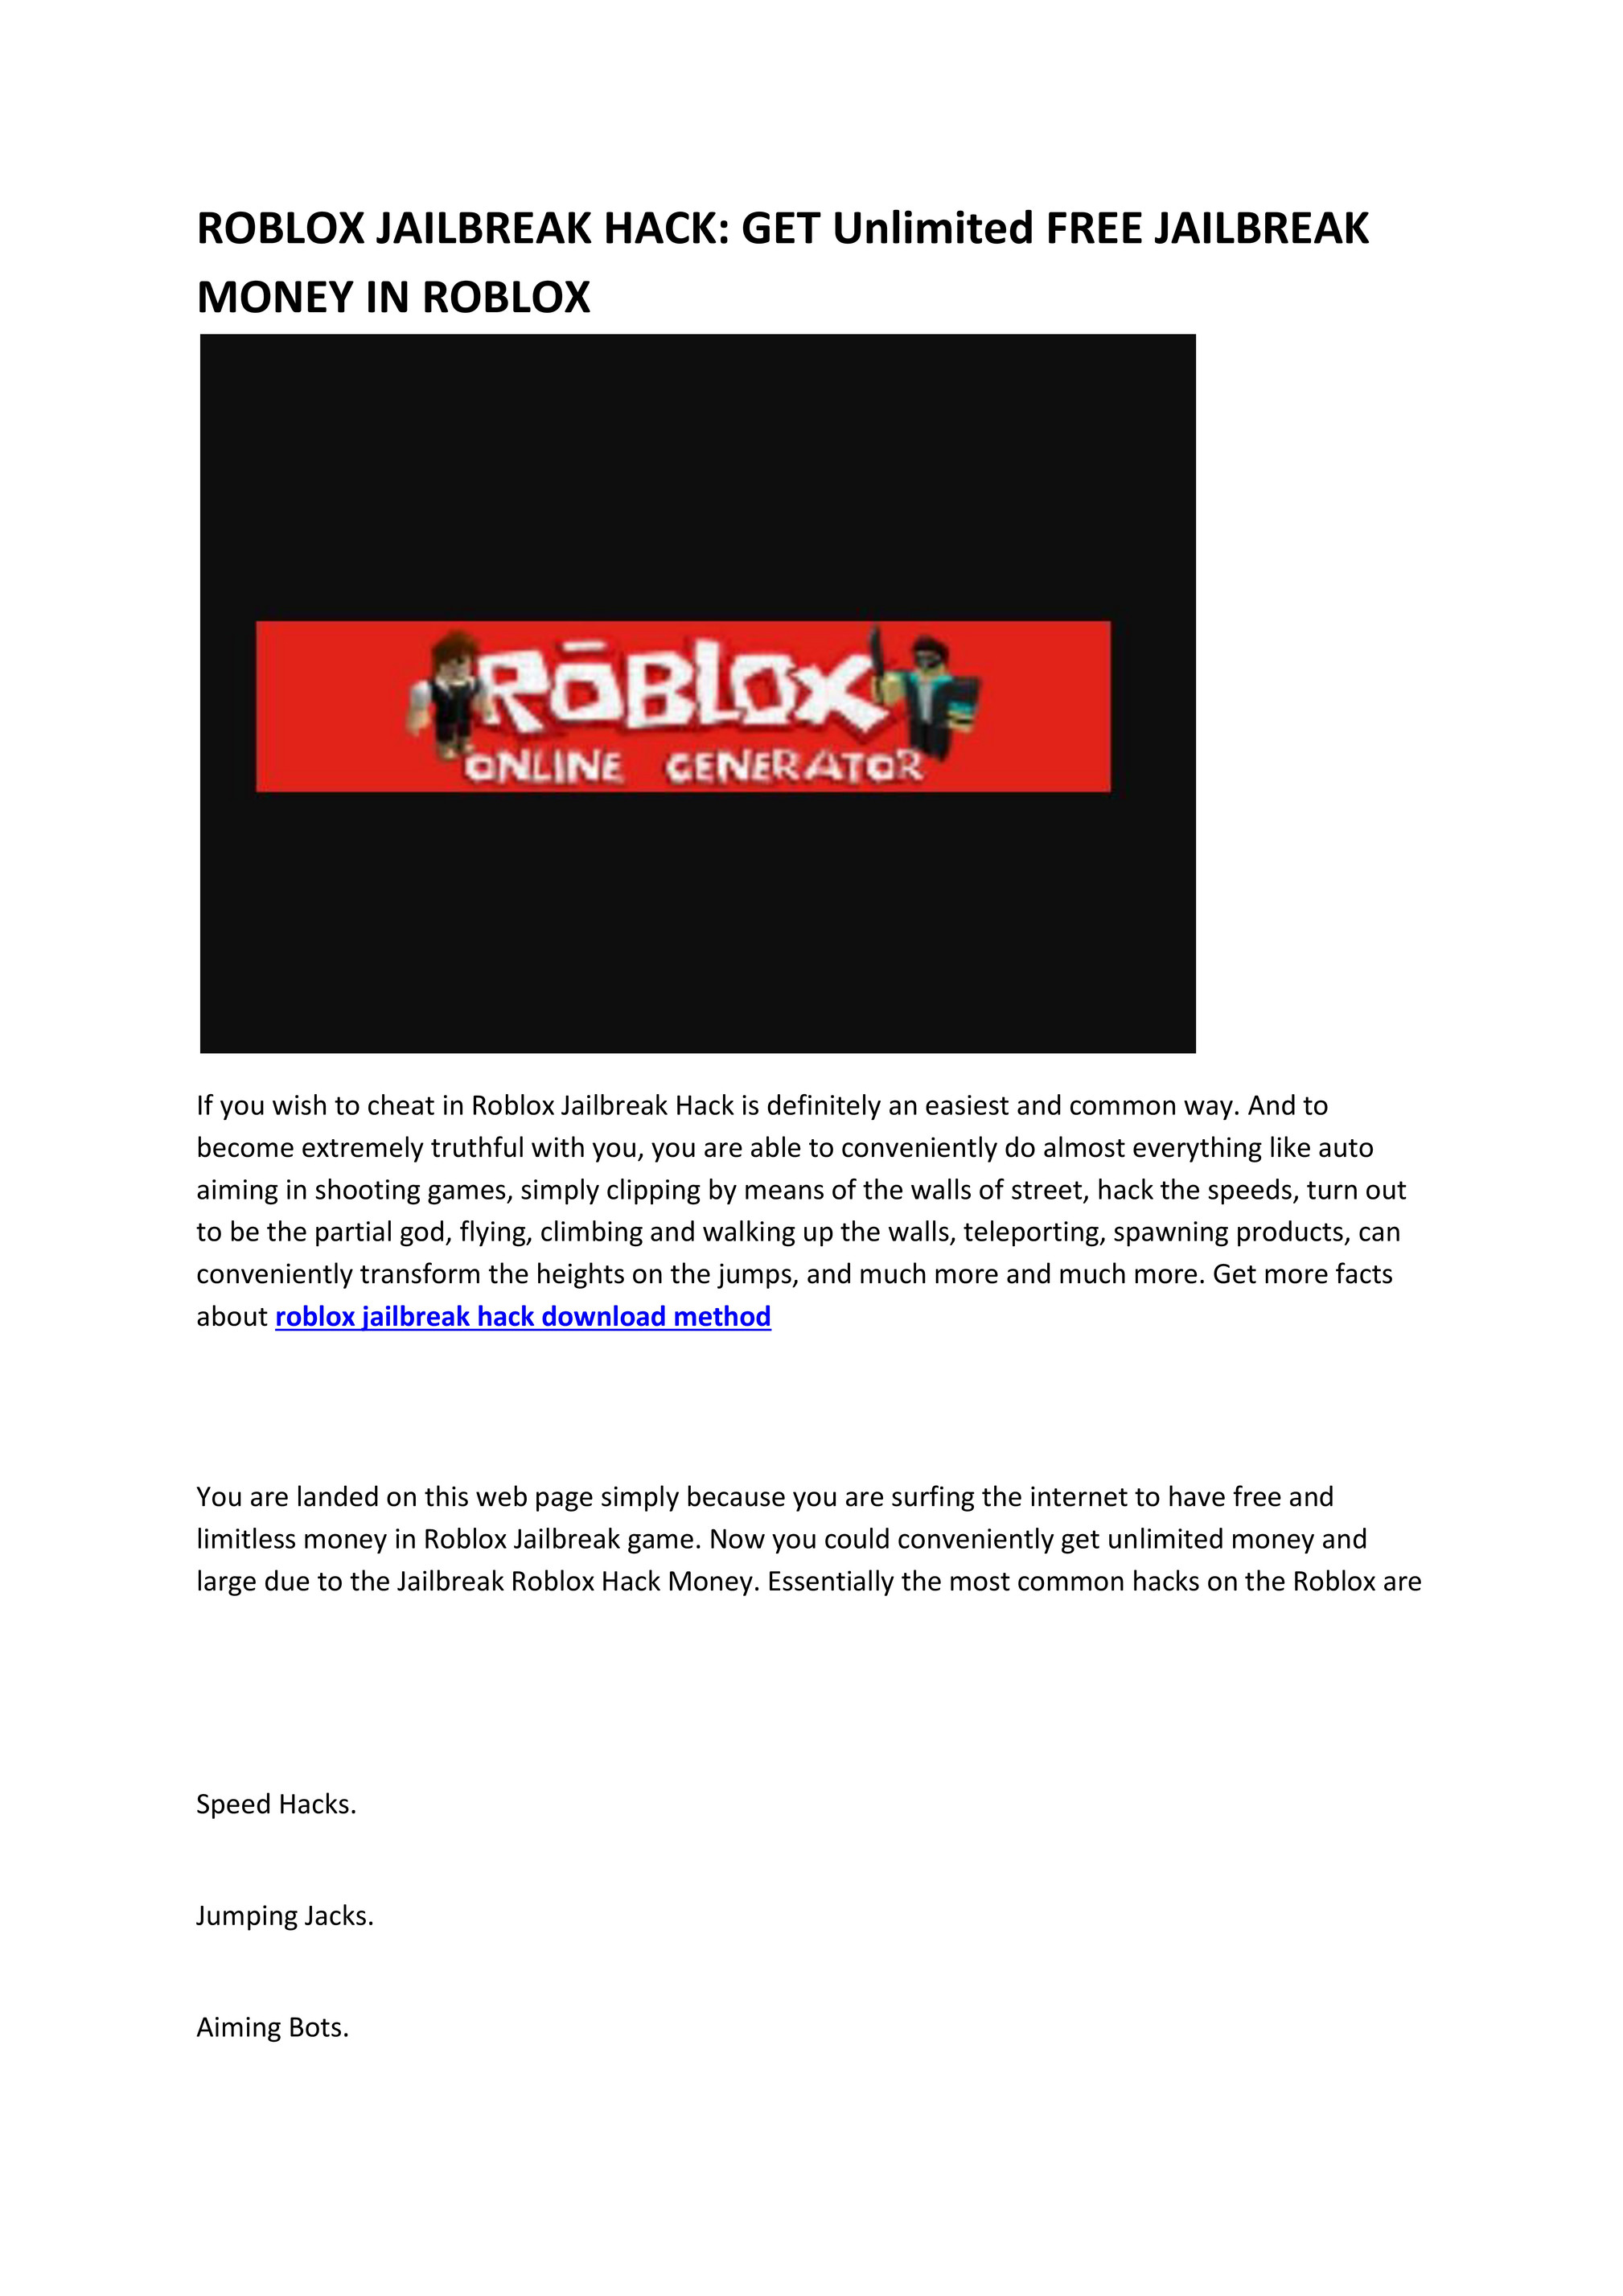 My Publications It S Also About Roblox Jailbreak Hack Money Page 1 Created With Publitas Com - how to get speed hacks in roblox jailbreak